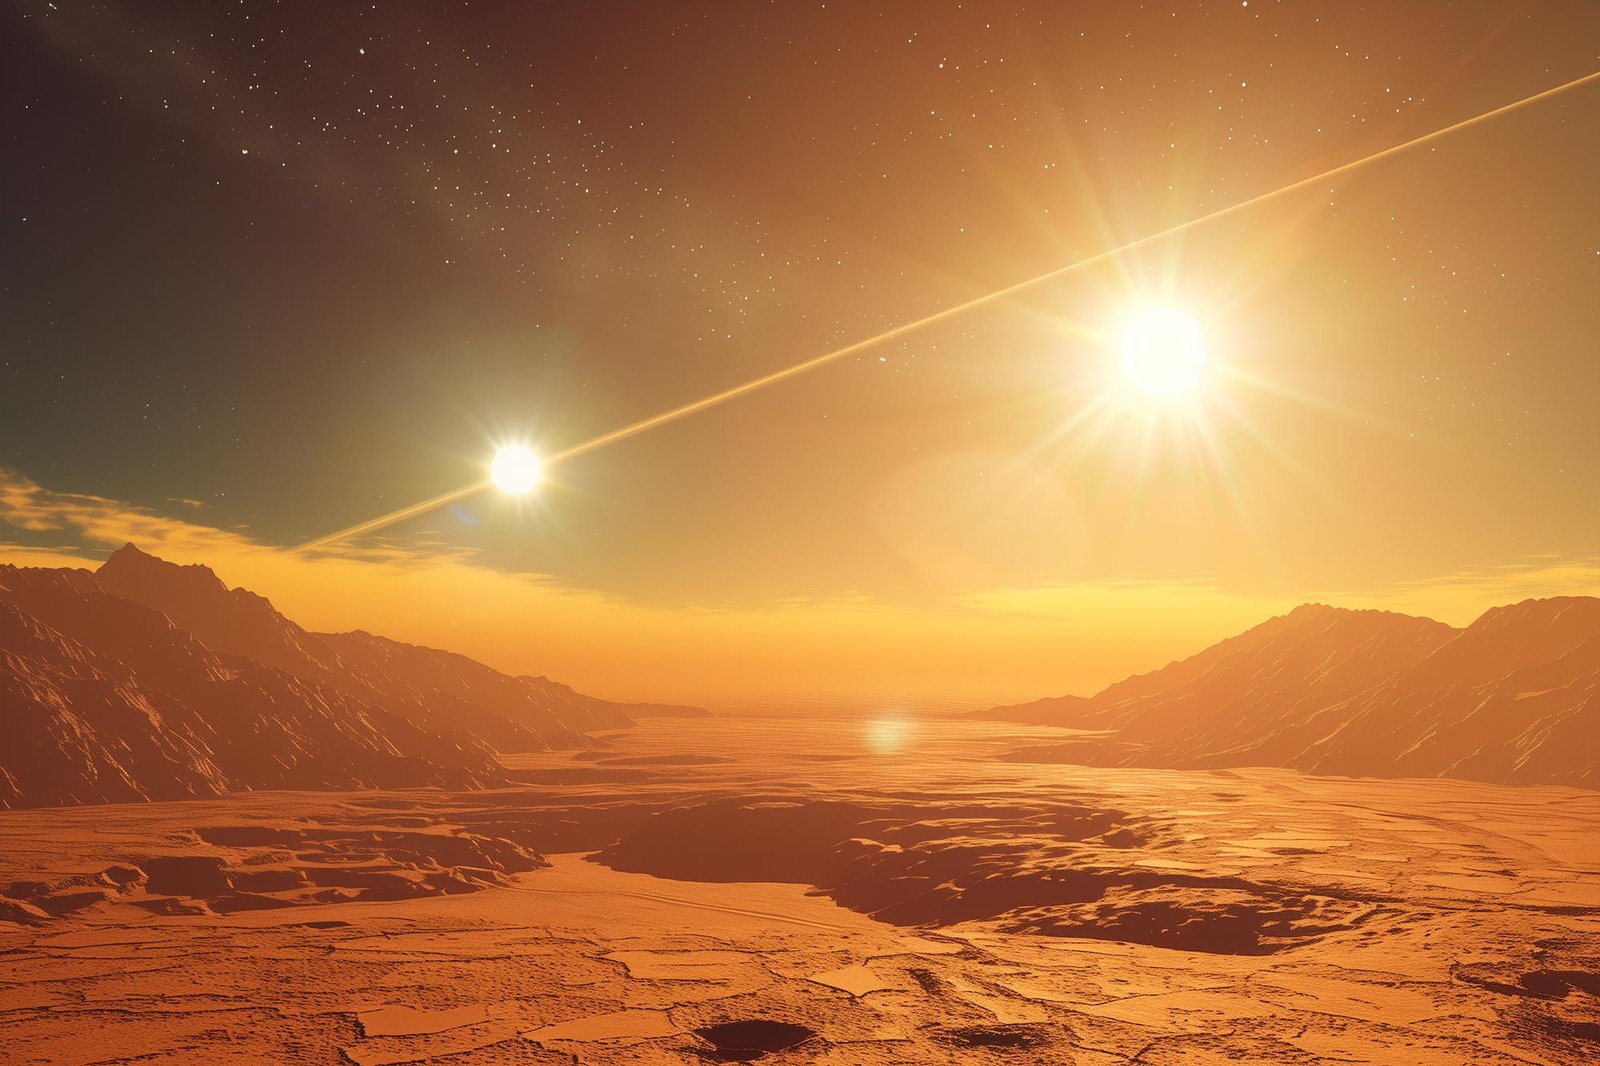 Yale Study Points to a More Livable Tatooine